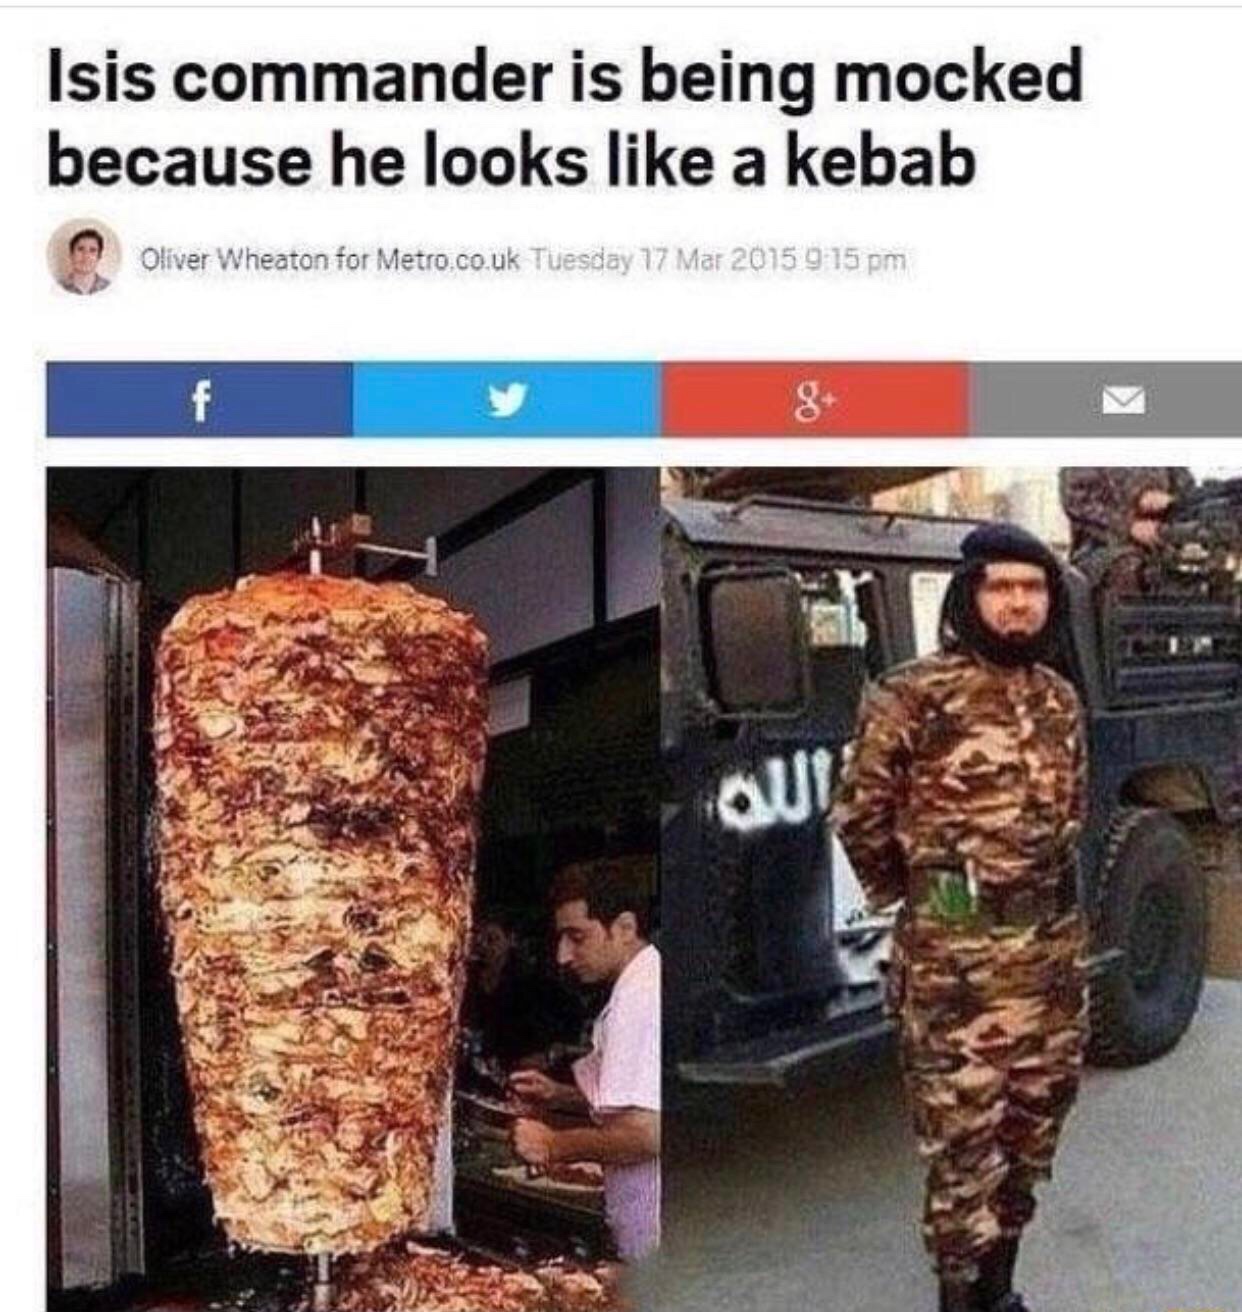 isis commander kebab - Isis commander is being mocked because he looks a kebab Oliver Wheaton for Metro.co.uk Tuesday